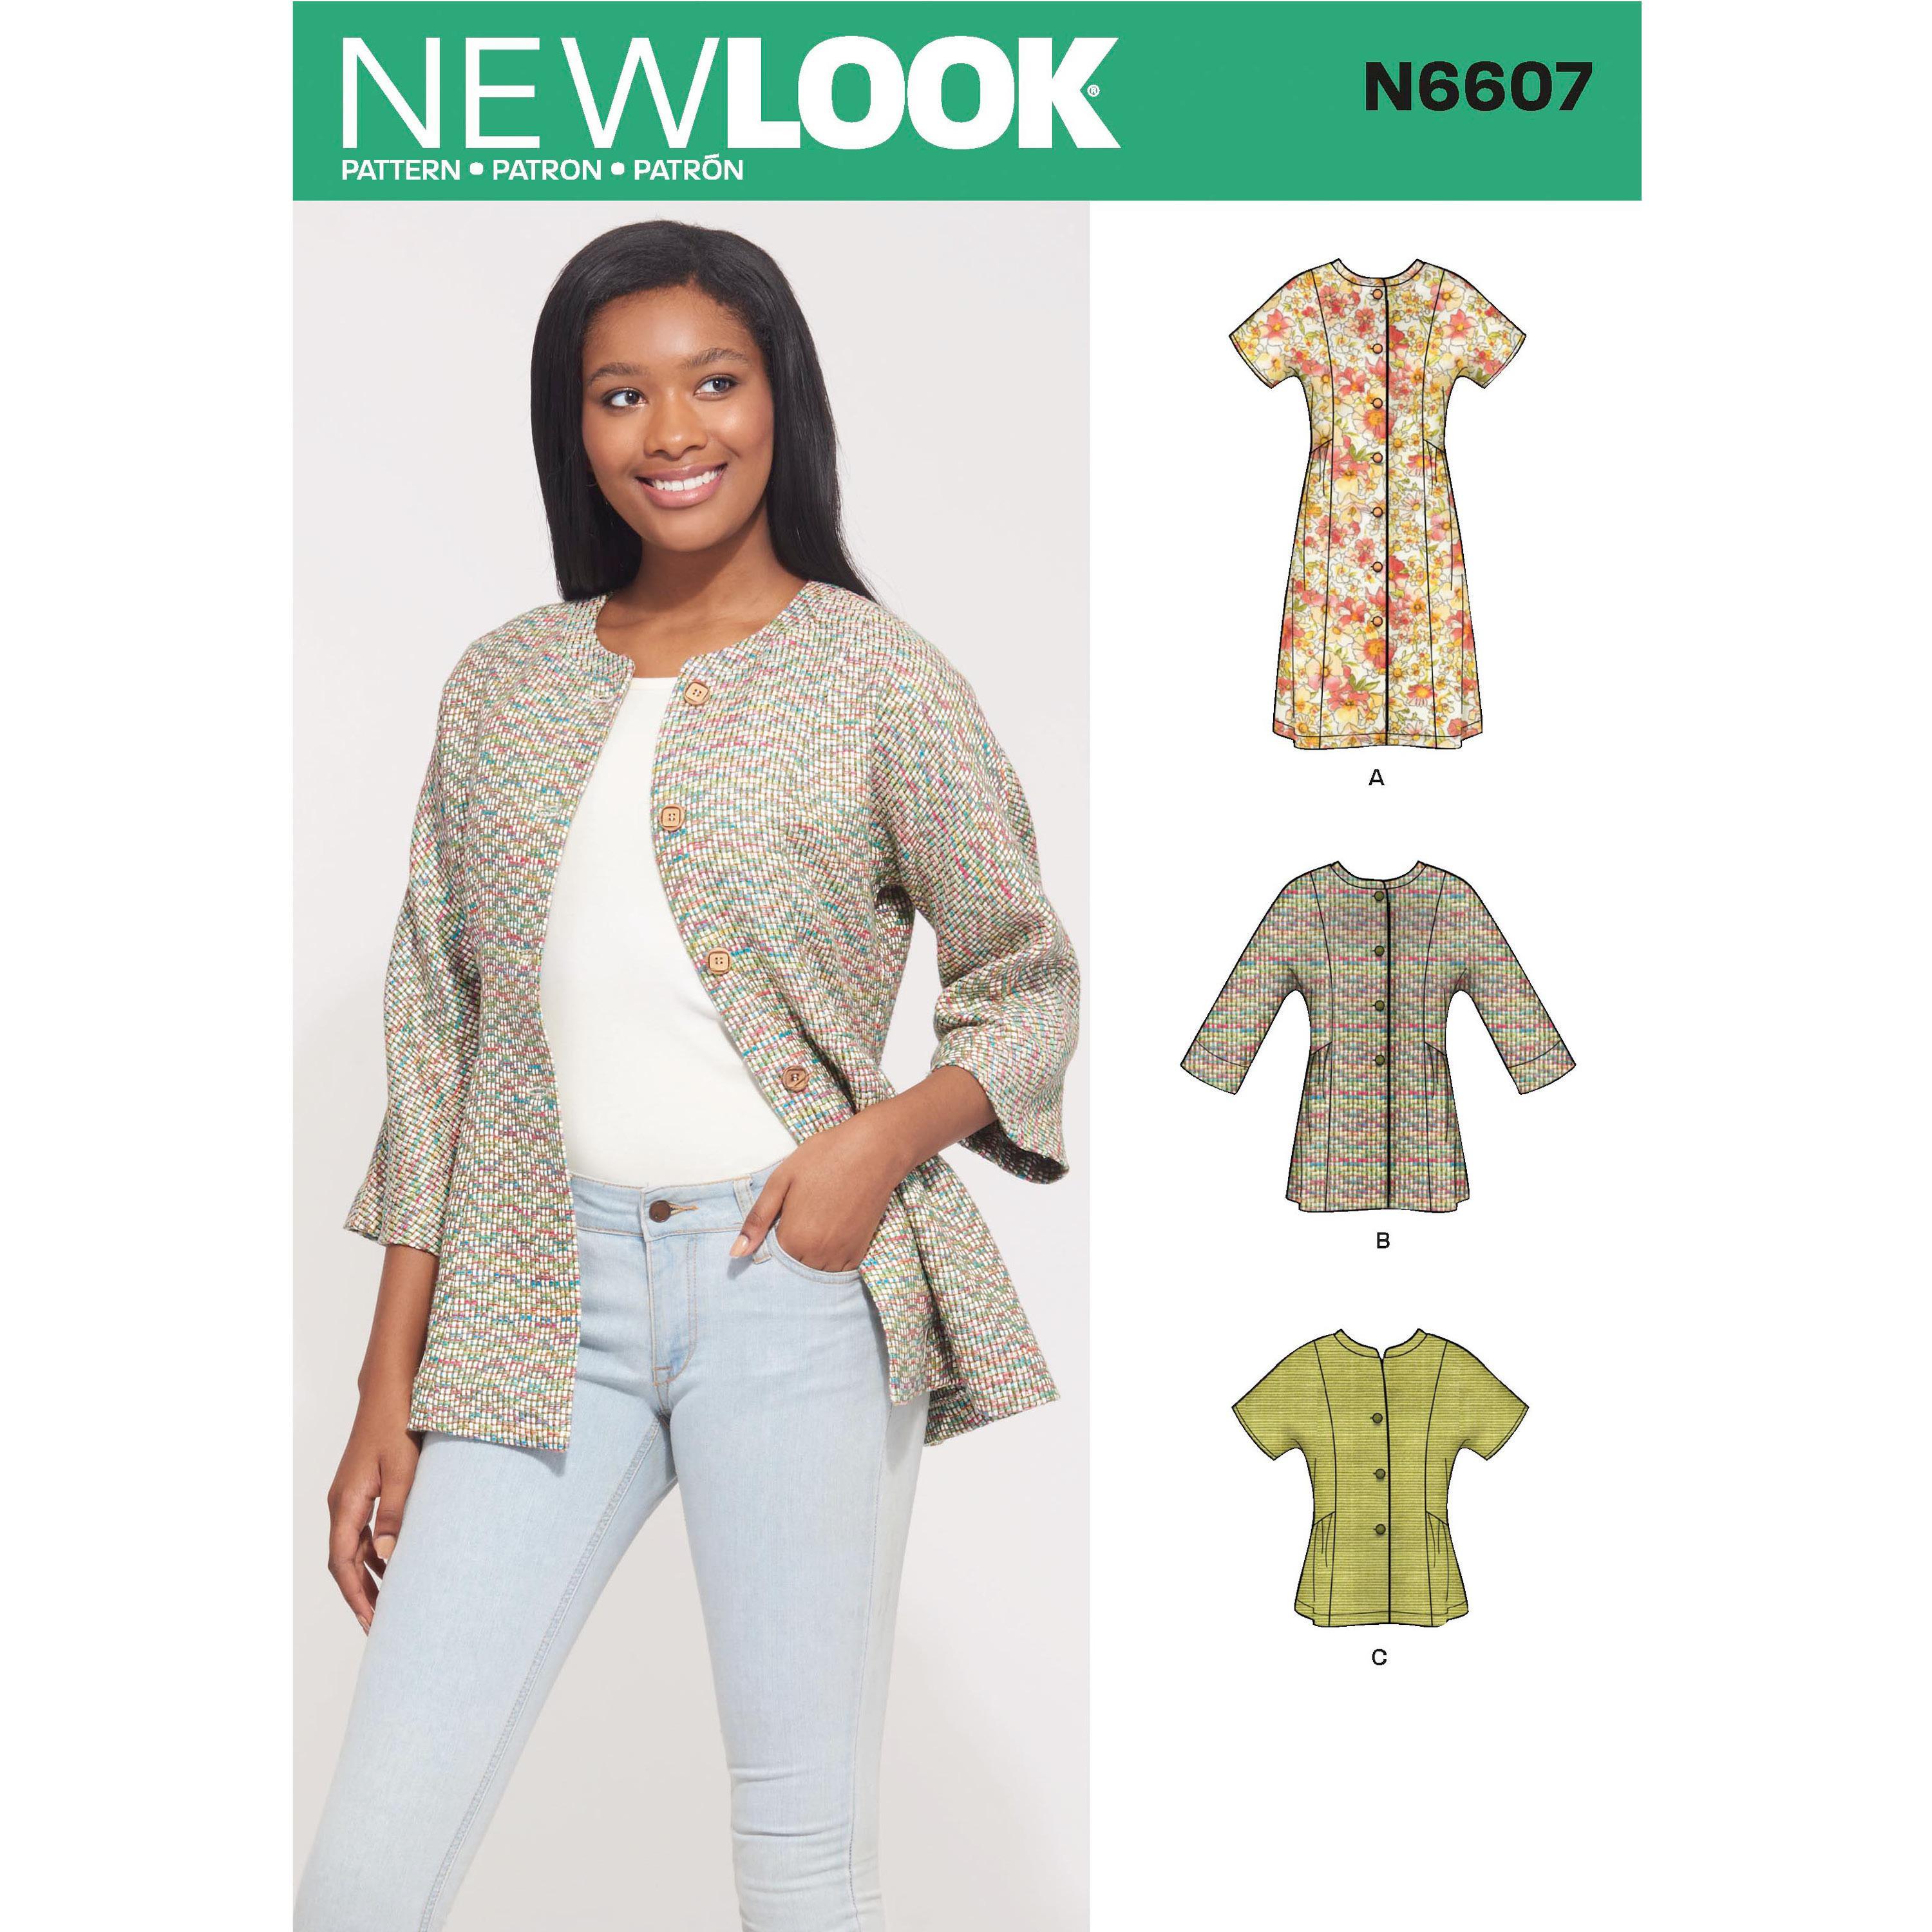 New Look Sewing Pattern N6607 Misses' Mini Dress , Tunic and Top